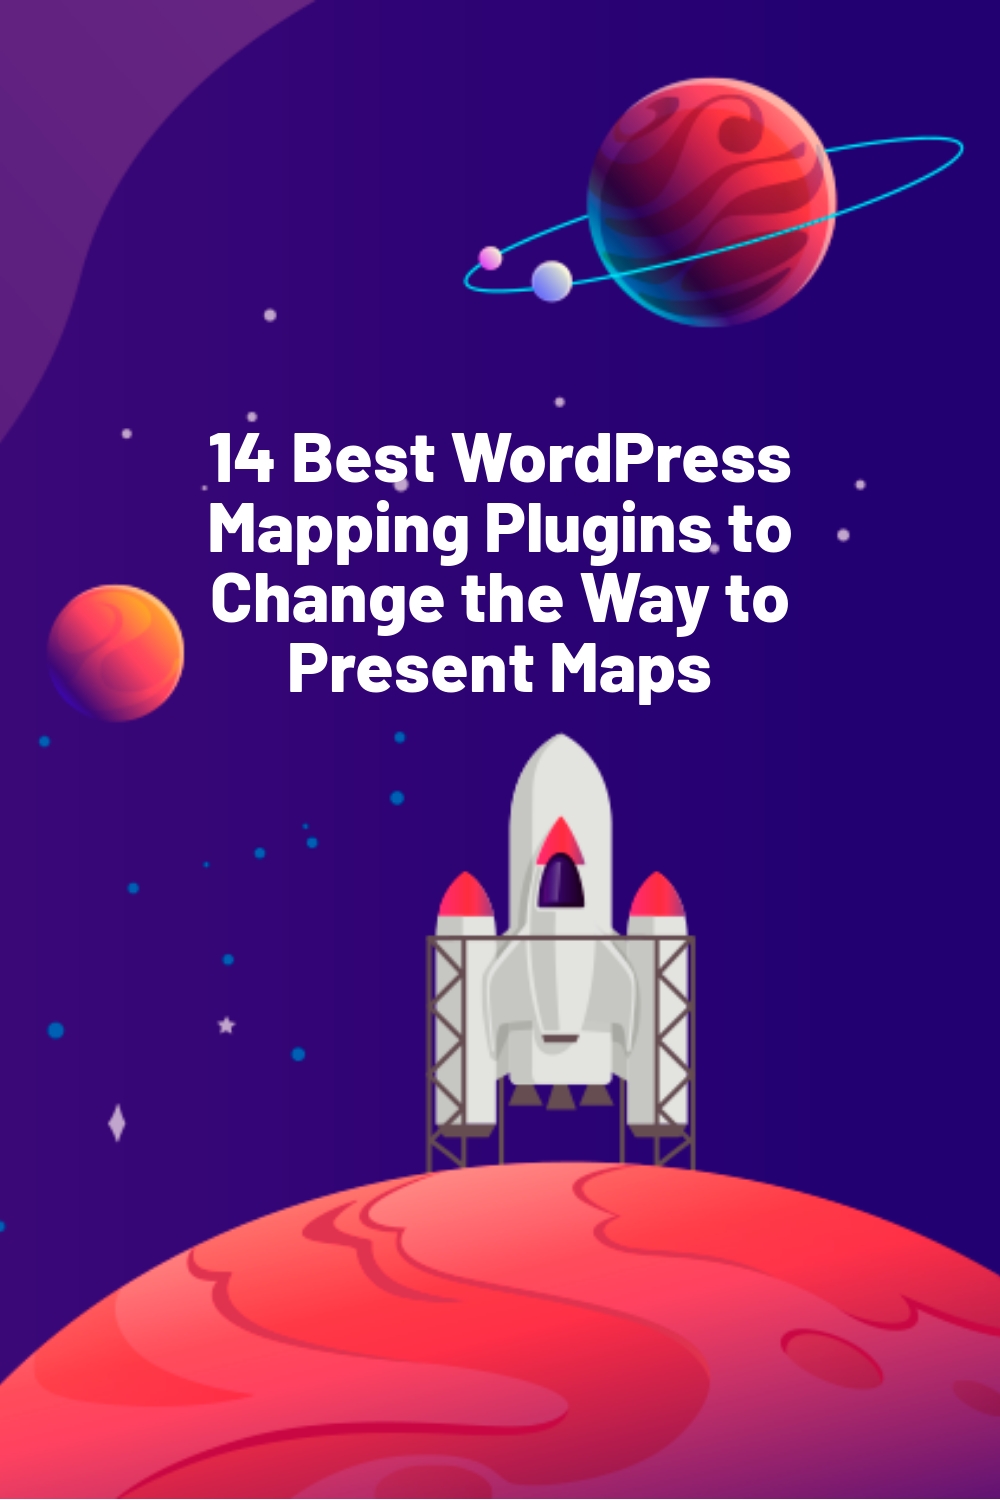 14 Best WordPress Mapping Plugins to Change the Way to Present Maps